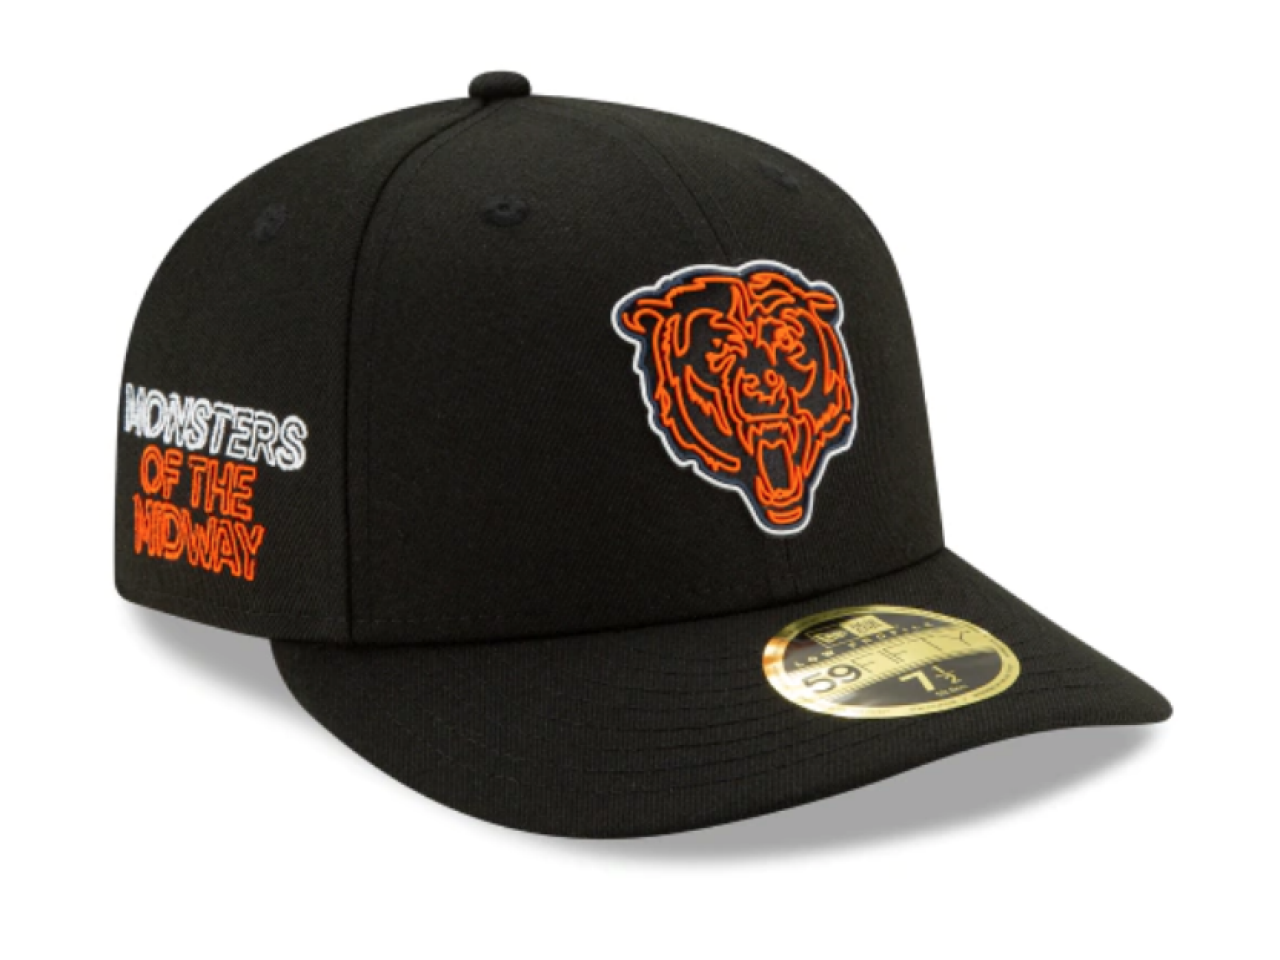 Ranking the 2020 NFL Draft hats from 